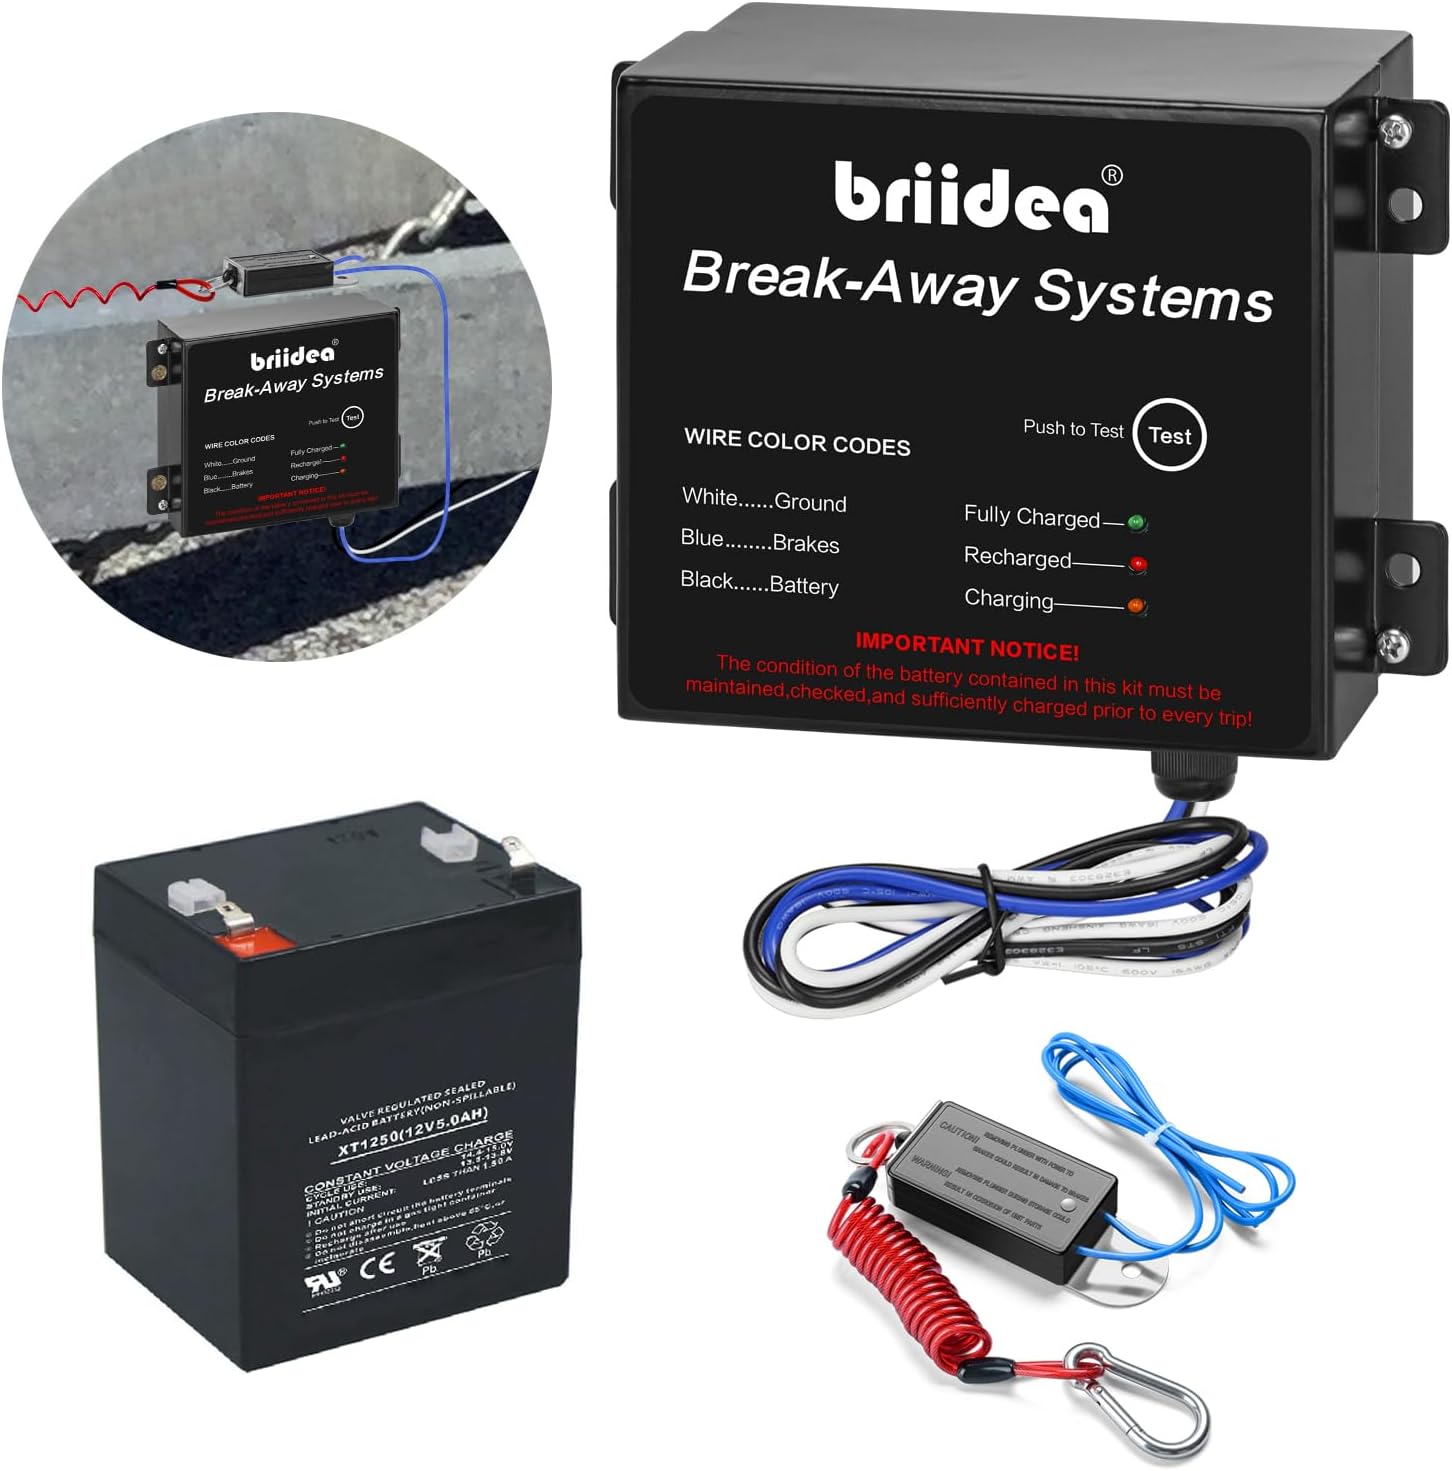 Trailer Brakeaway Kit, Briidea Trailer Brakes Breakaway Kit with 12V 5AH Battery and Charger, LED Indicator, All Metal Waterproof Enclosure, Designed for Safe Towing, Ensure Your Driving Safety